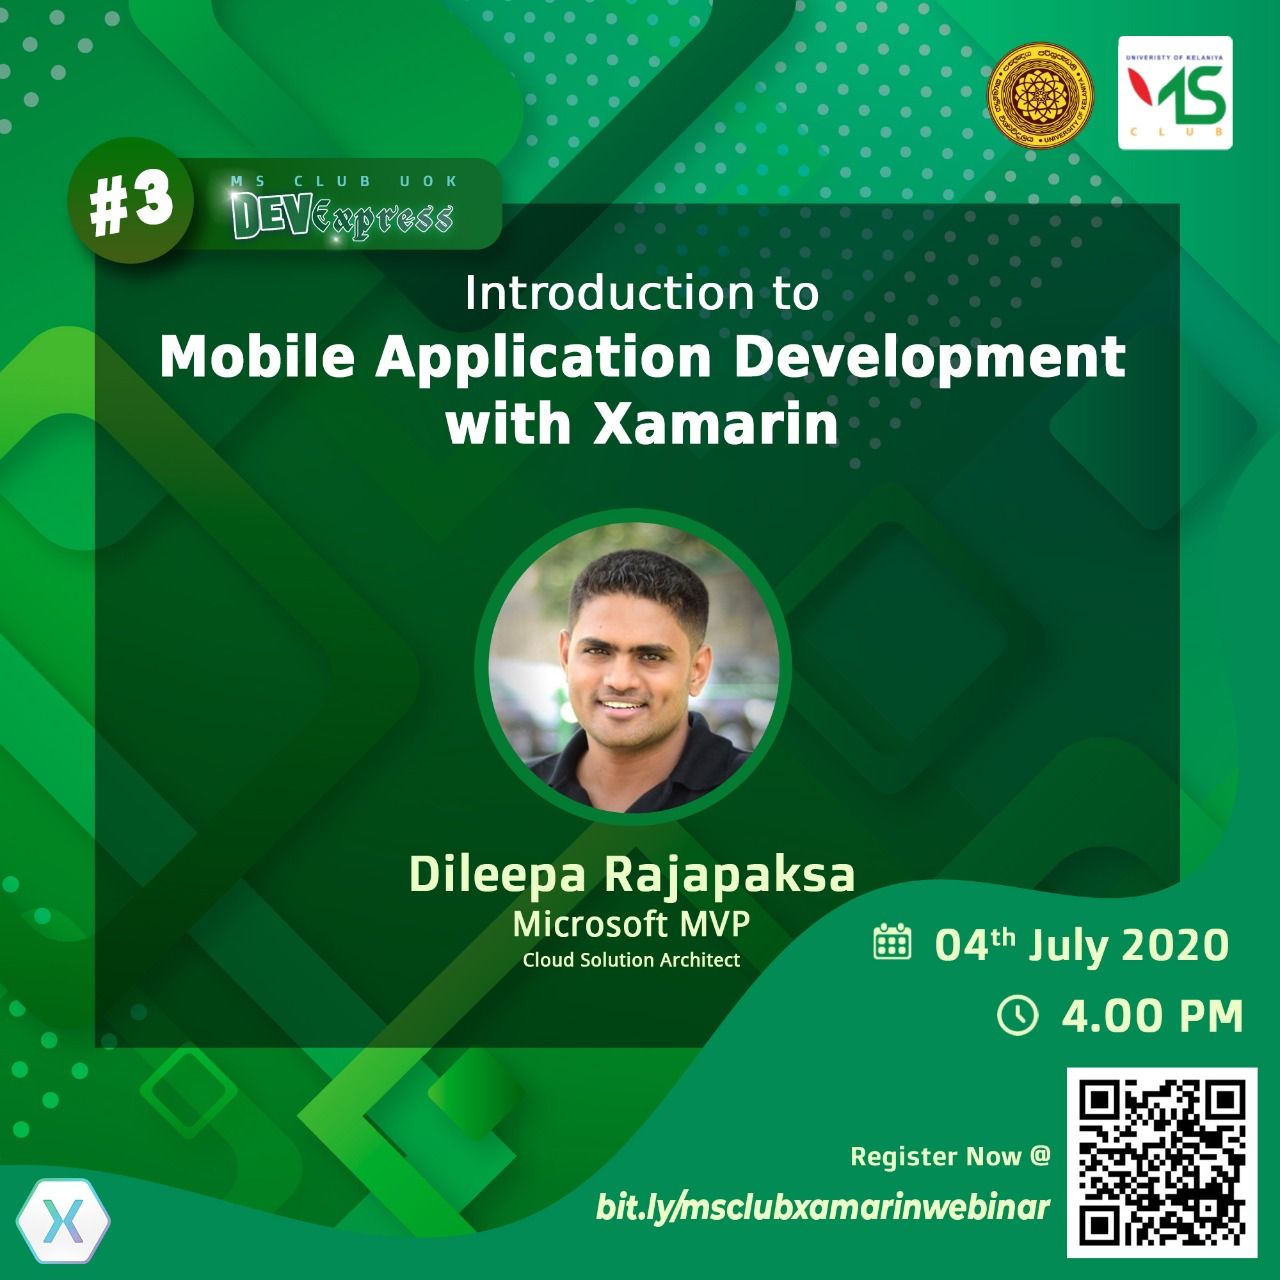 Introduction to Mobile Application Development with Xamarin